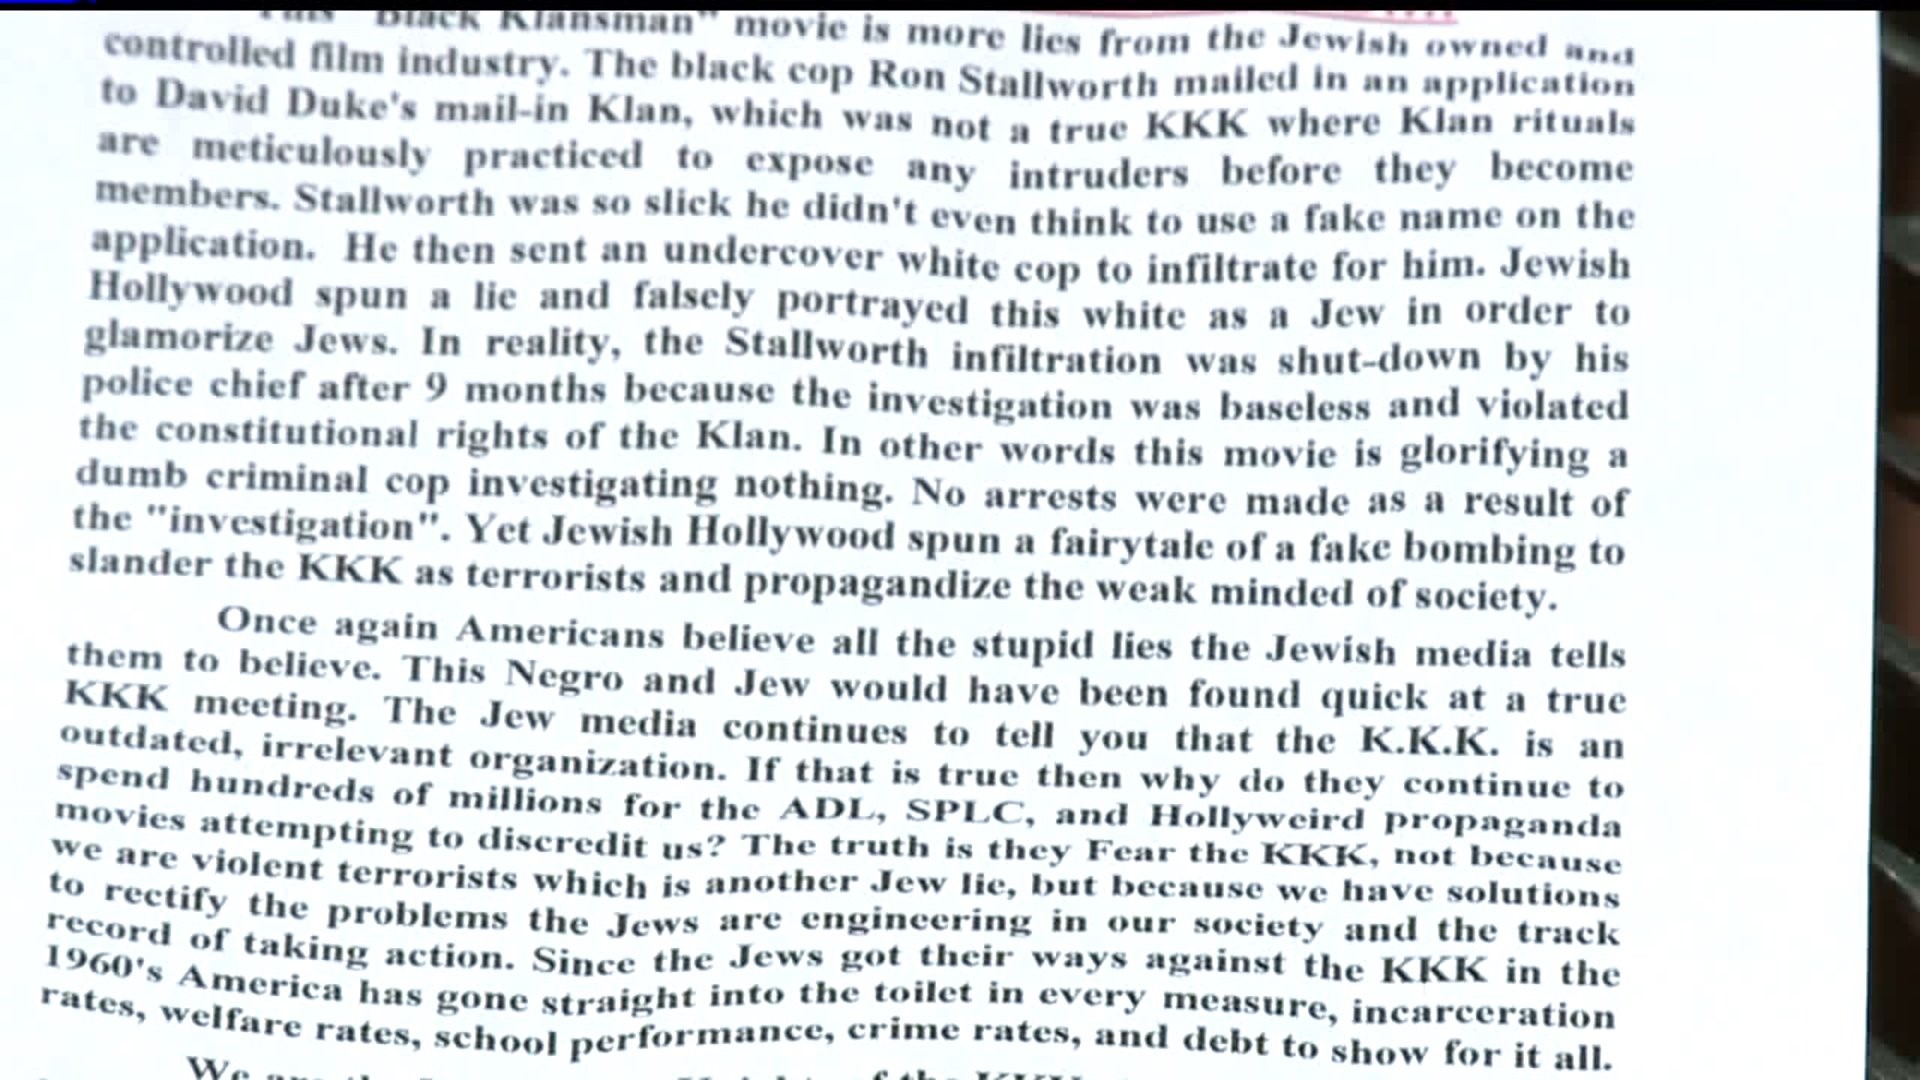 KKK flyers distributed at York County movie theater